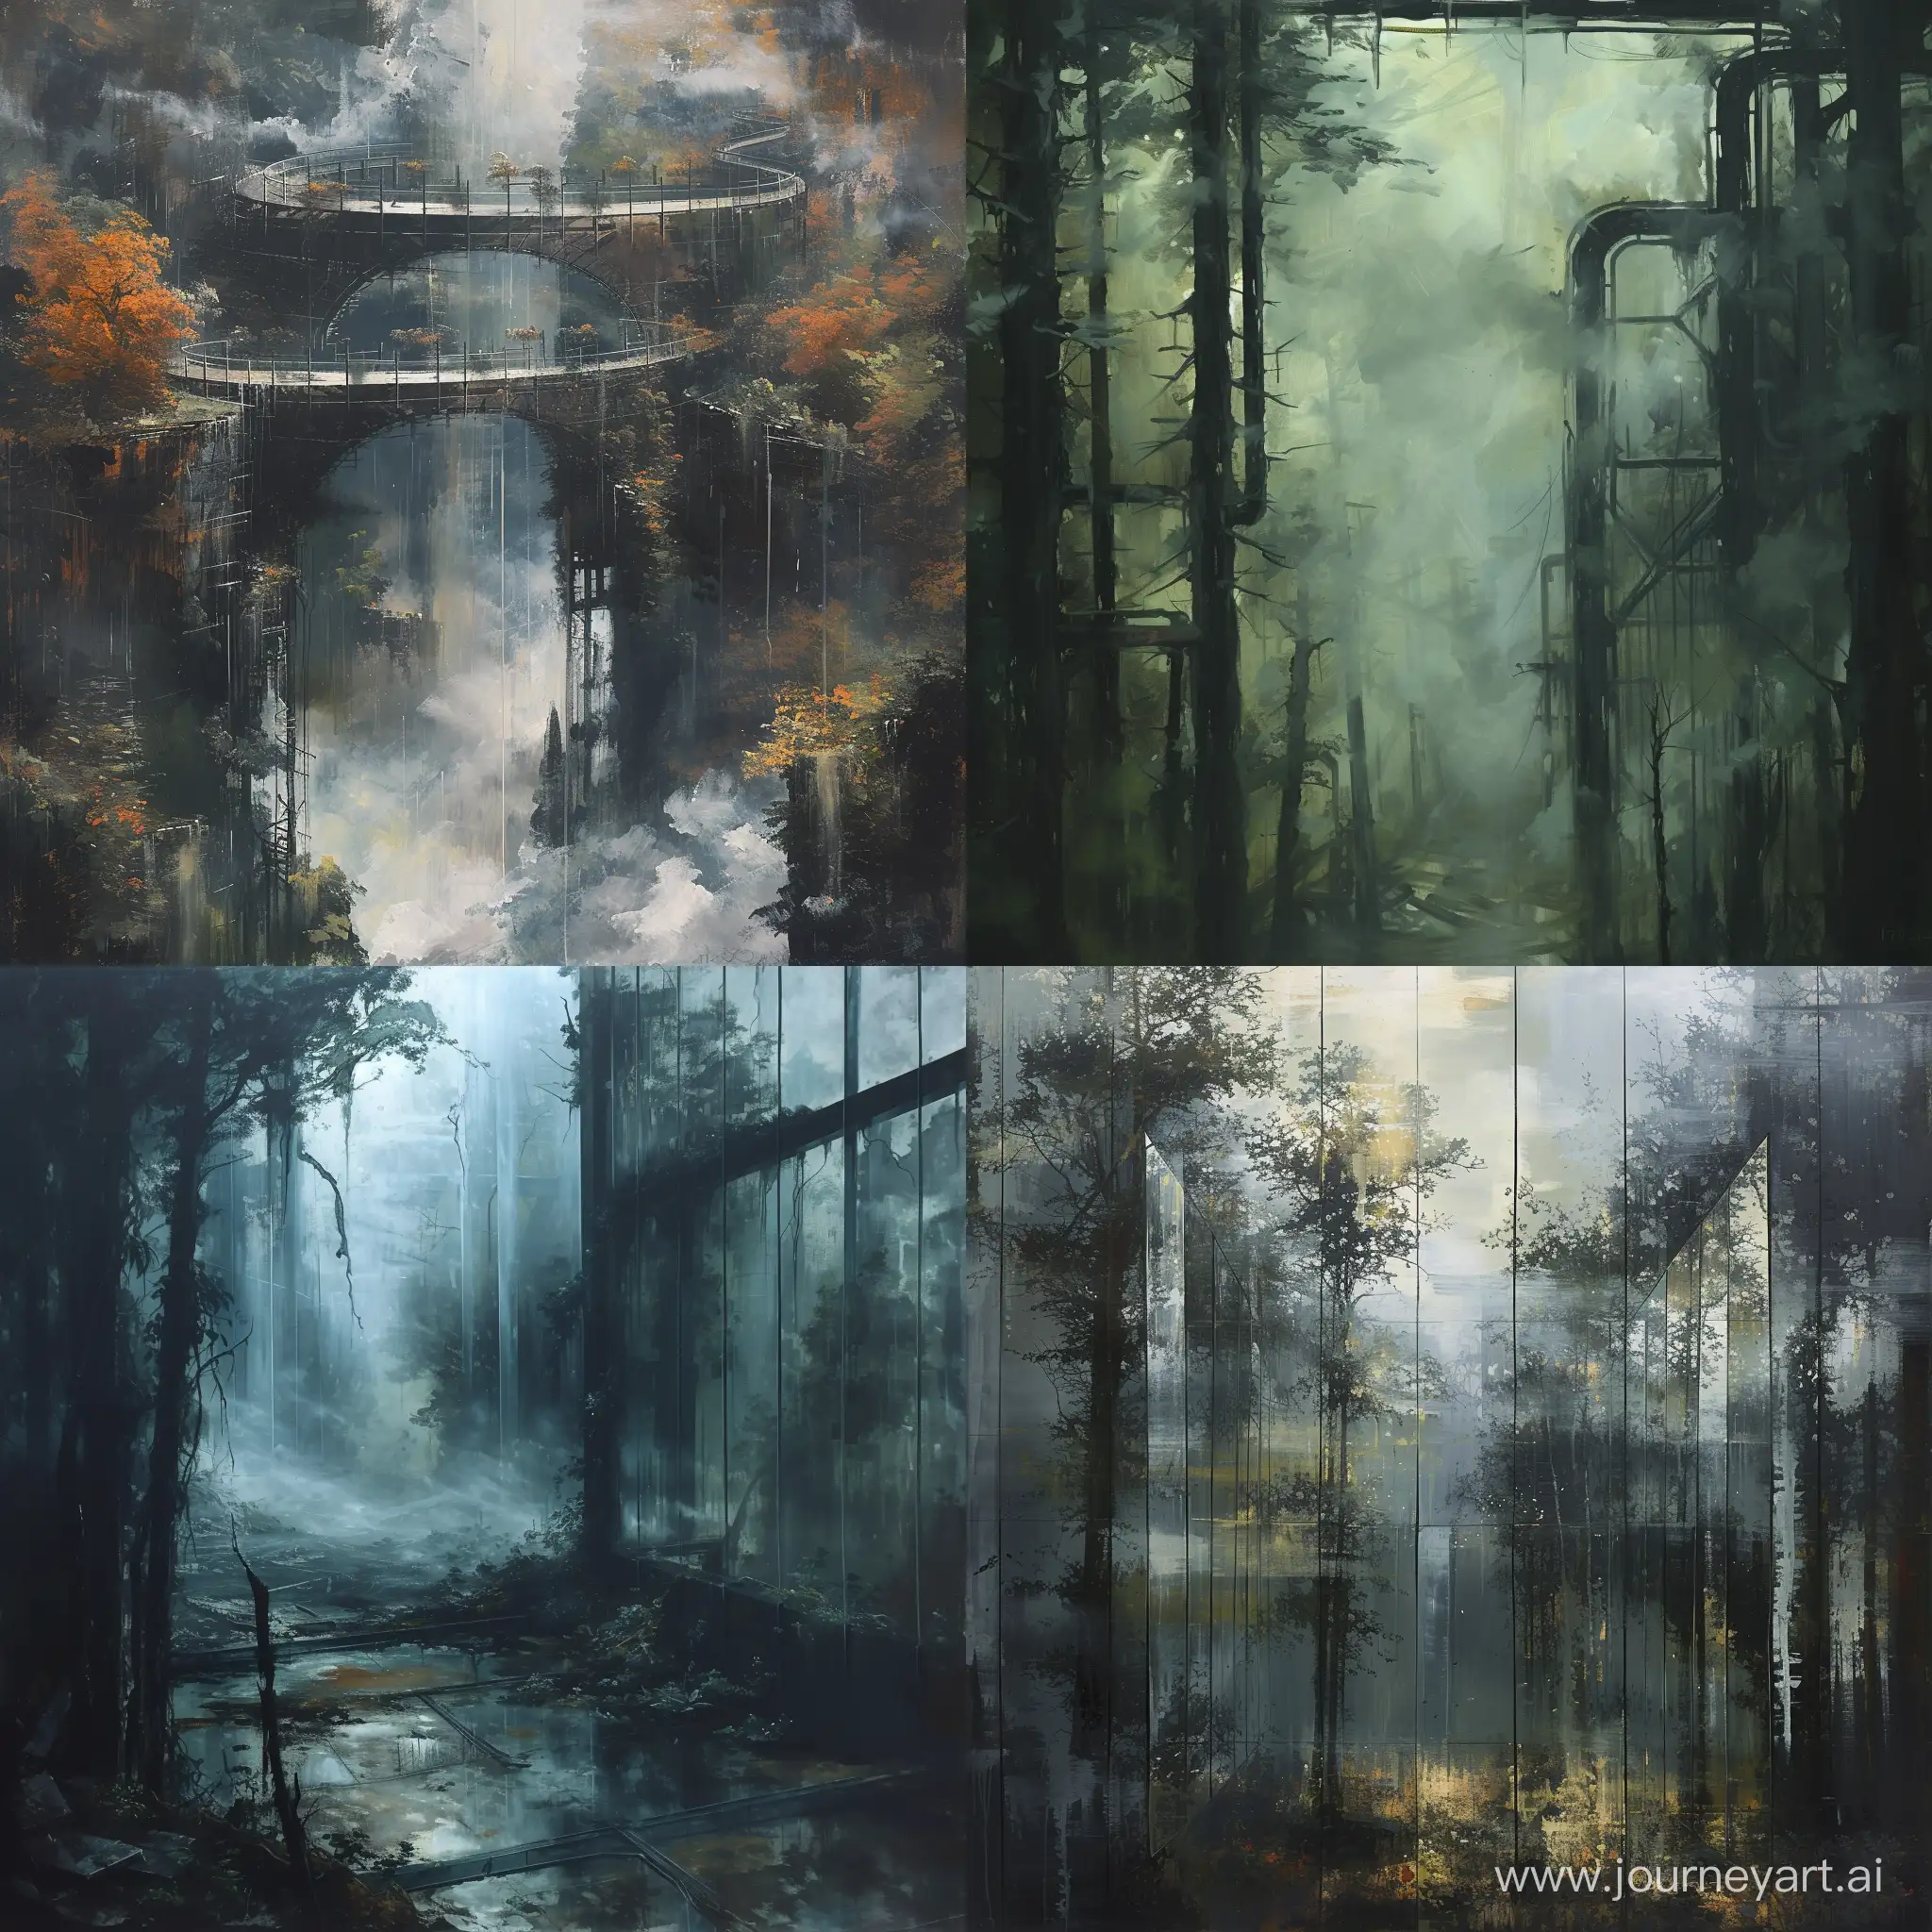 A beautifully drafted (((oil painting))), with thick, dramatic (((strokes))) capturing a gritty, steel-and-glass ((forest)) surrounded by a (mysterious mist)
--ar 16:9 